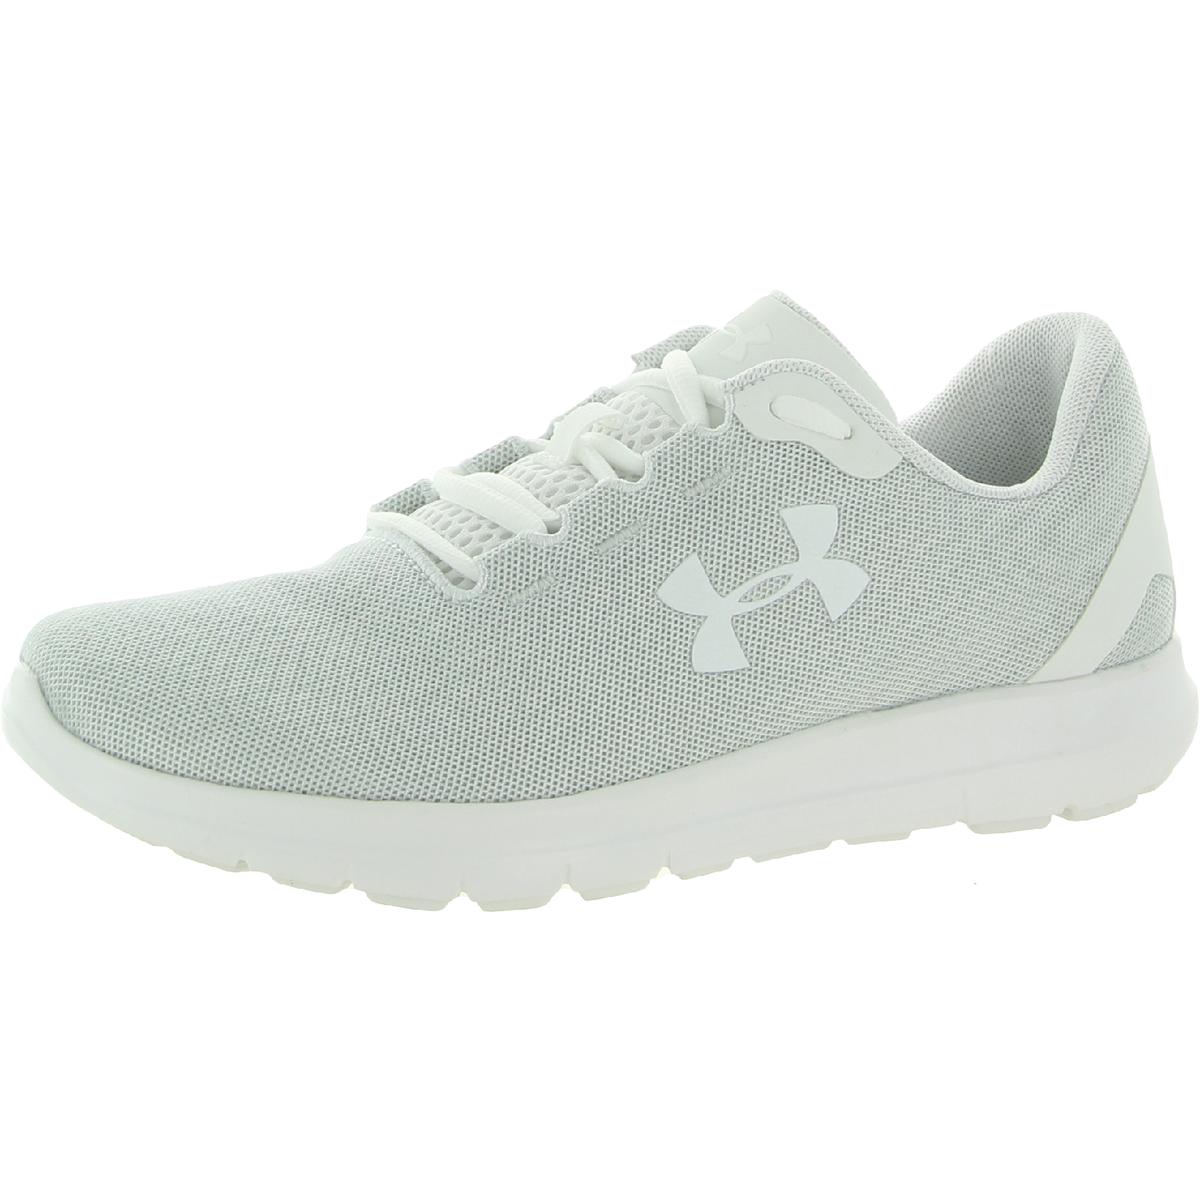 Under Armour Womens Remix Performance Fitness Running Shoes Sneakers BHFO  1354 | eBay